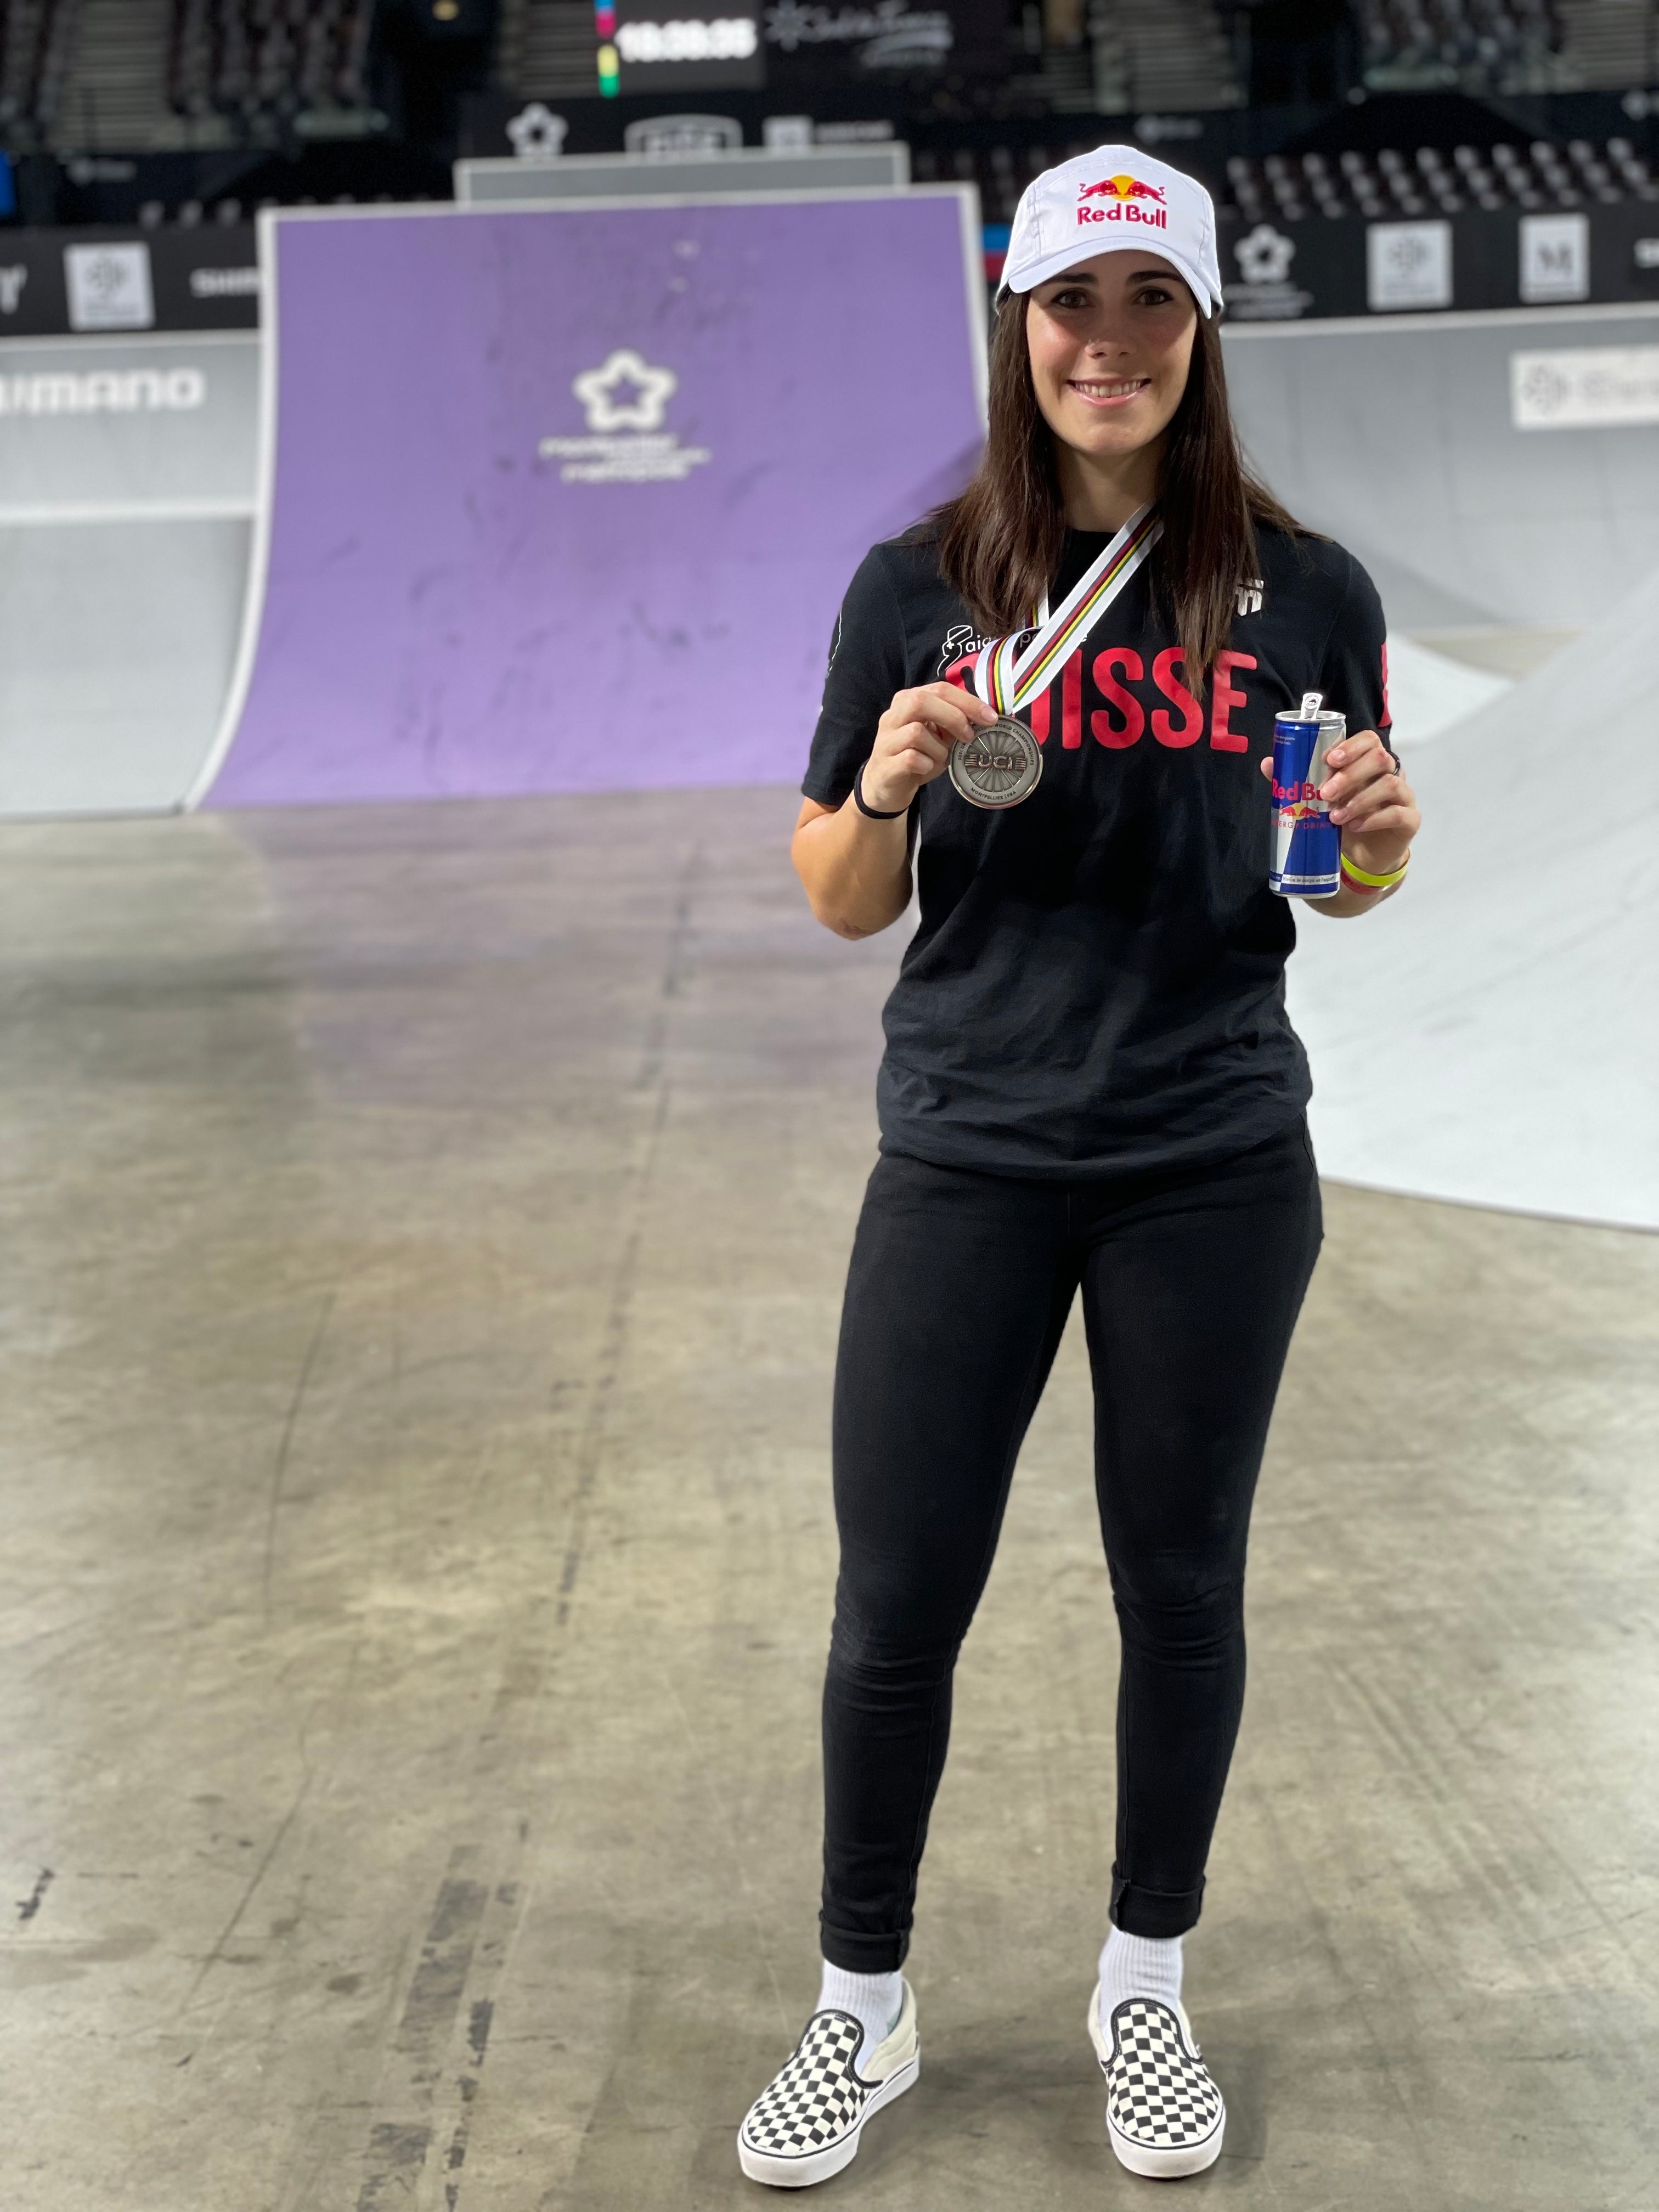 Nikita Ducarroz Takes 2nd Place at UCI Worlds 2021